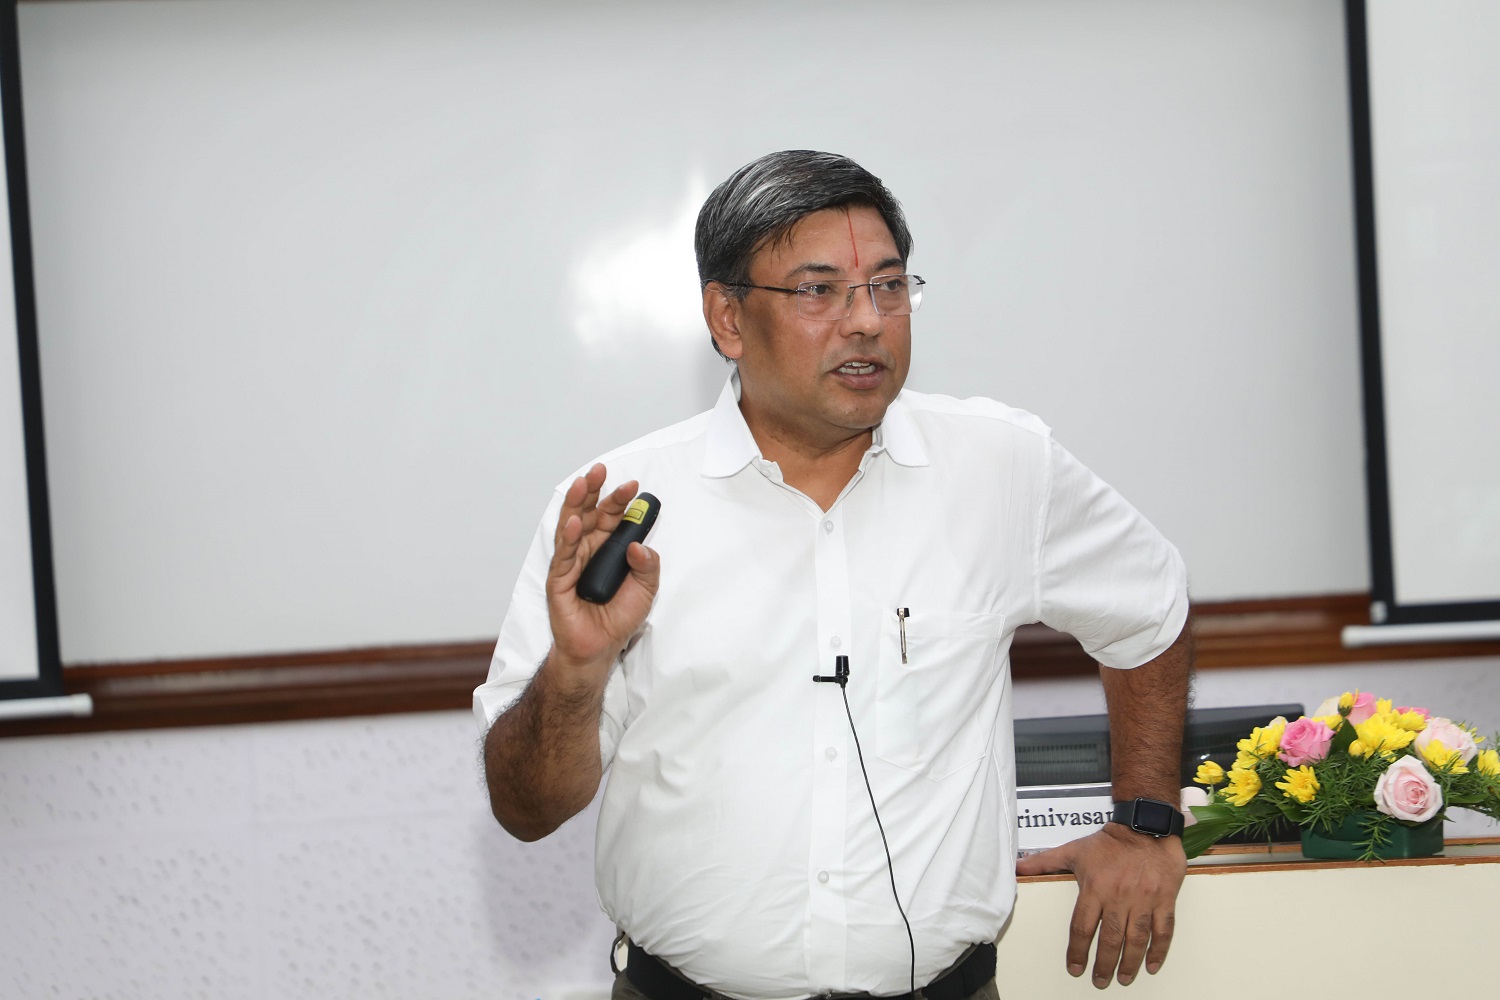 Prof. R Srinivasan, Chairperson of the two-year fulltime MBA: Post Graduate Programme in Management (PGP) and PGP in Business Analytics (PGP-BA), and faculty of the Strategy area of IIMB, speaks on: 'Digitalization and Strategy'.